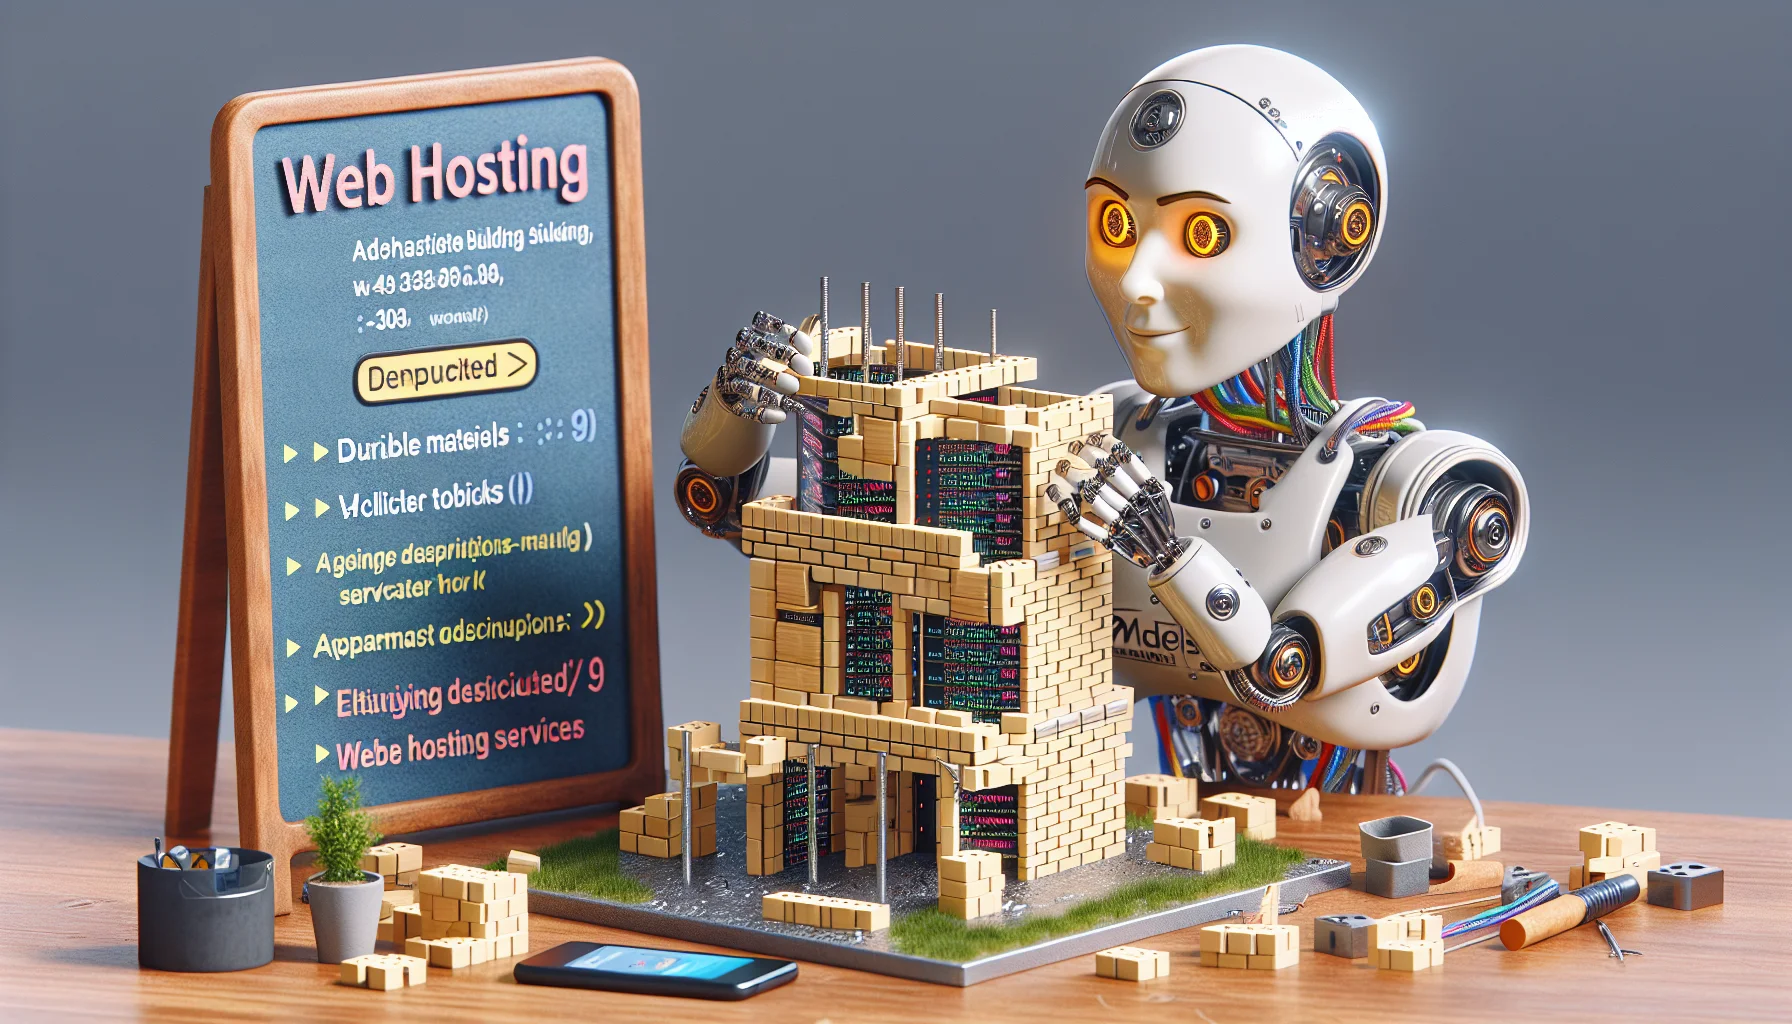 Create a humorous and detailed scene that showcases a website builder, personified as an advanced AI robot constructed from durable materials, focusing intensely on constructing a website that looks like a building, complete with digital bricks and code wires. The AI is Caucasian and is portrayed here as female. Adjacent to her, a signboard advertises enticing web hosting services, with appealing descriptions and rates. The scene implies an interesting blend of technology and creativity, illustrating AI's role in website building and web hosting.